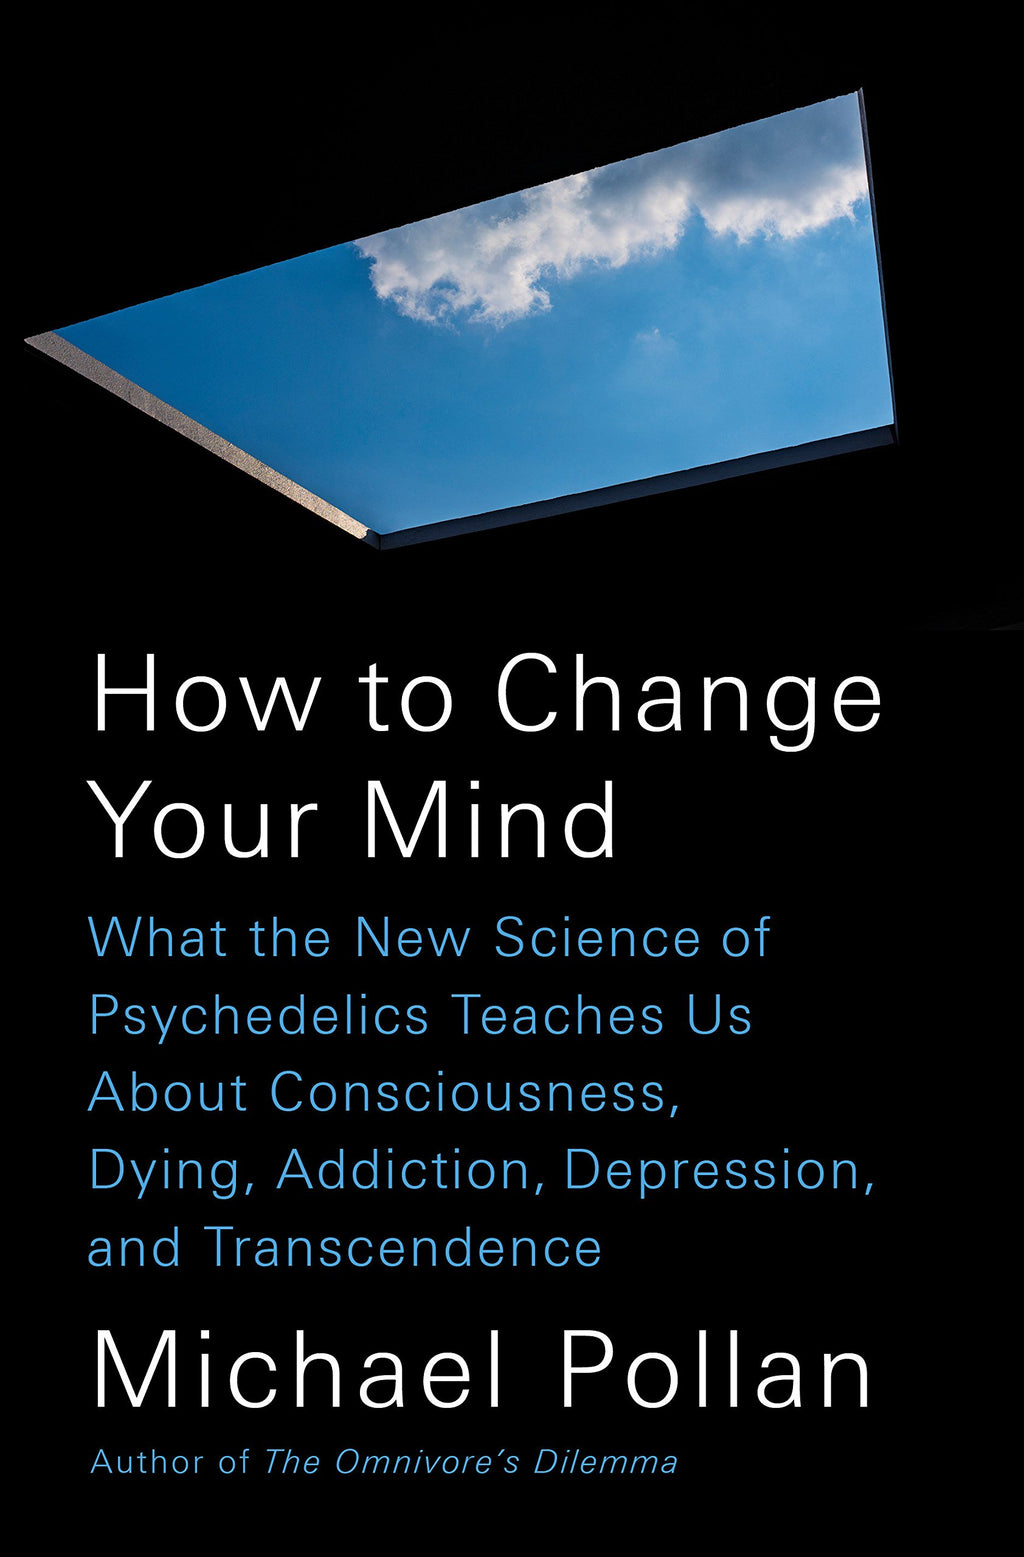 How to Change Your Mind: What the New Science of Psychedelics Teaches Us about Consciousness, Dying, Addiction by Michael Pollan